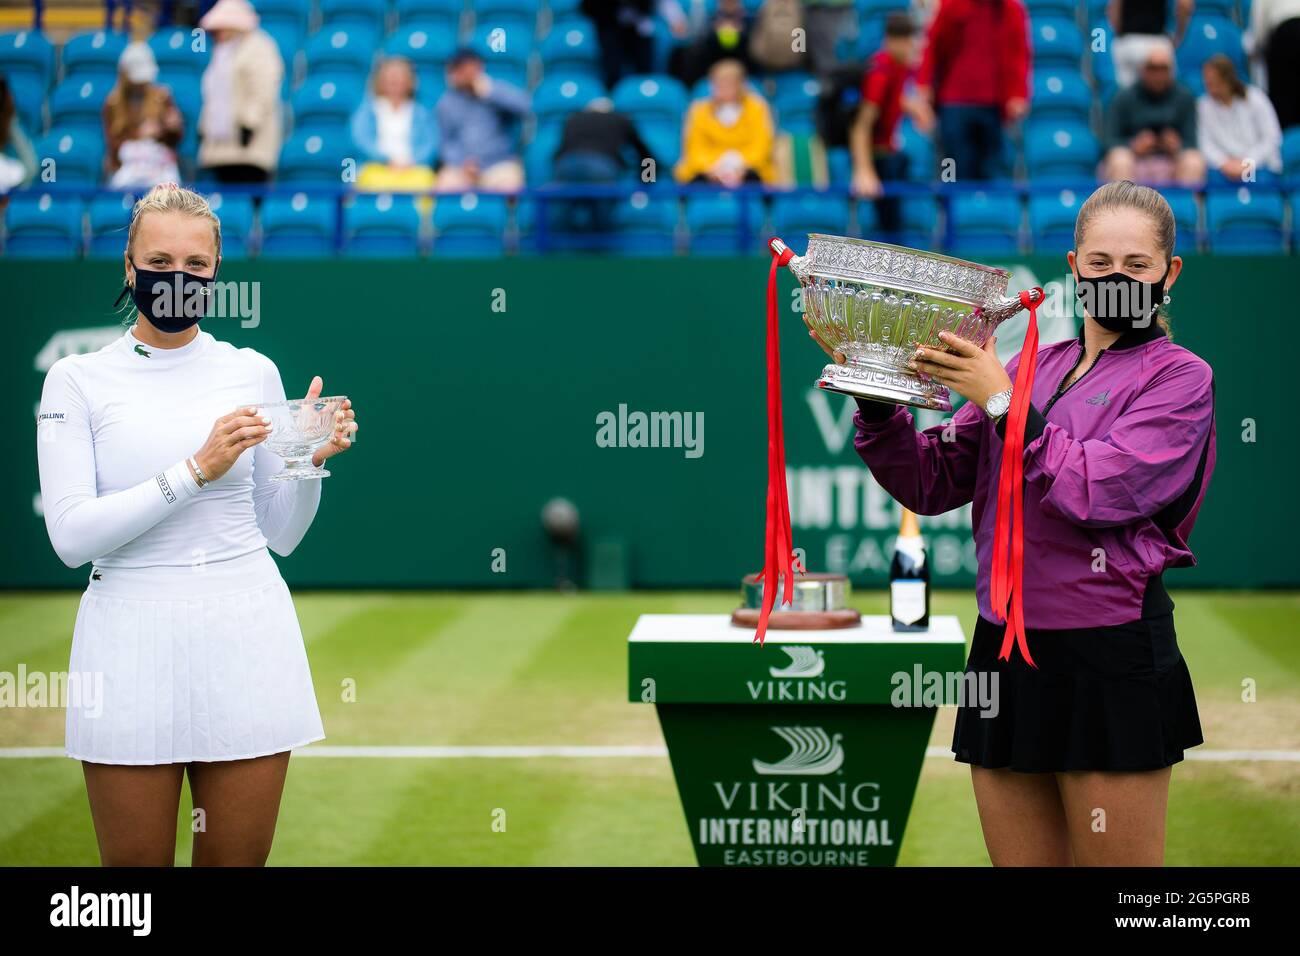 Anett Kontaveit of Estonia and Jelena Ostapenko of Latvia during the trophy ceremony after the final of the 2021 Viking International WTA 500 tennis tournament on June 26, 2021 at Devonshire Park